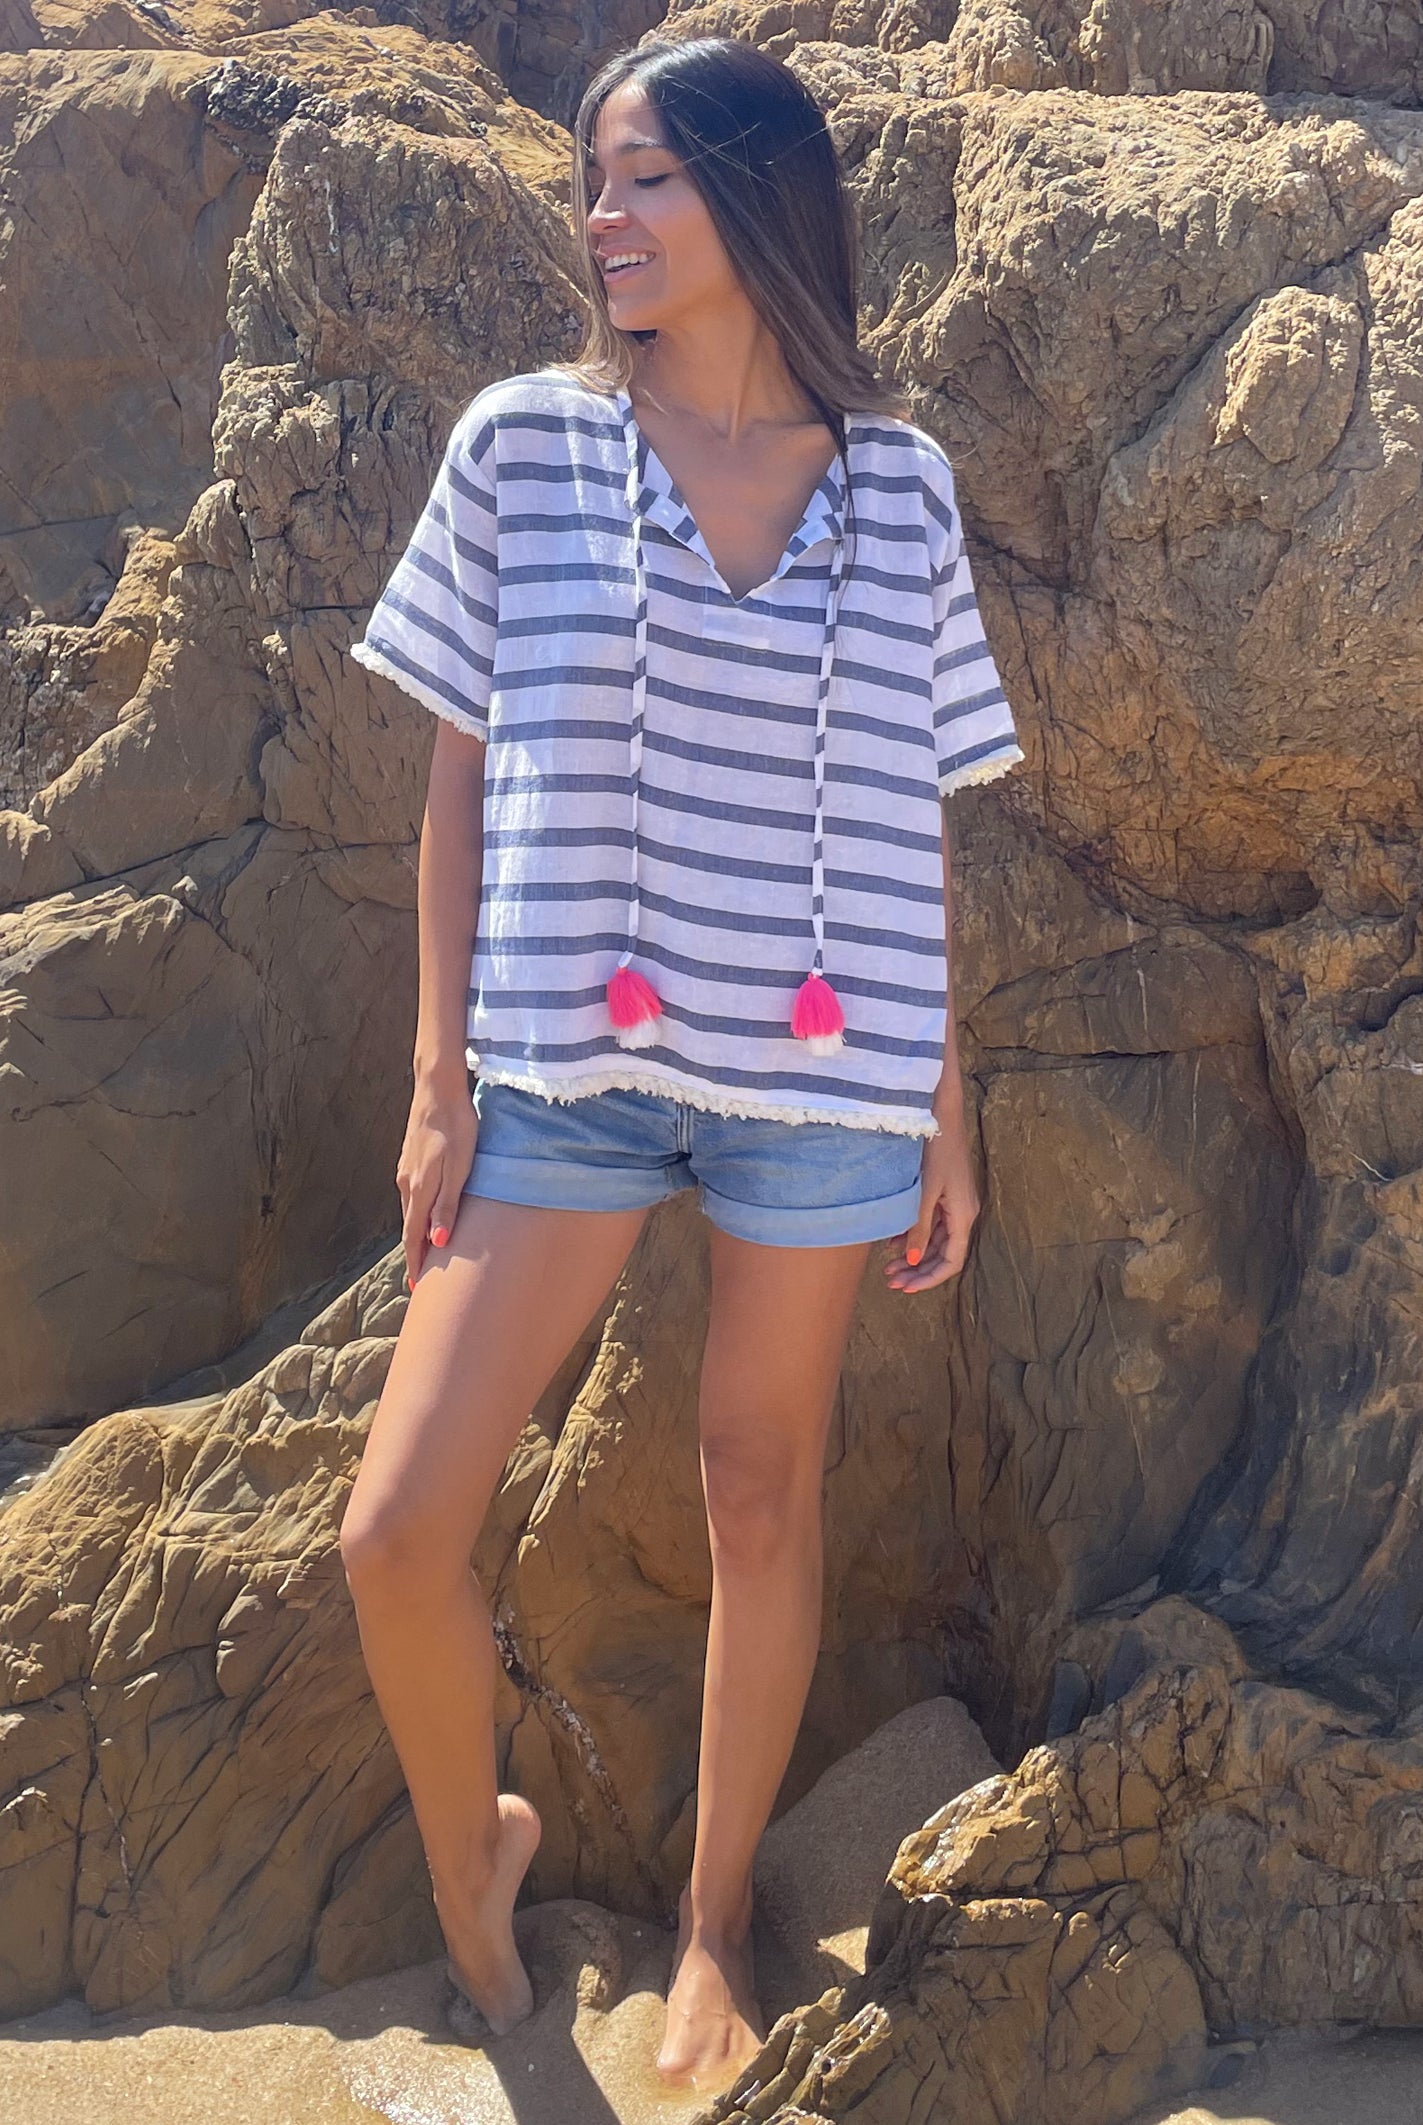 A model stood on a beach wearing a Rosebud by Rose and Rose Antibes top and denim cut off shorts. 